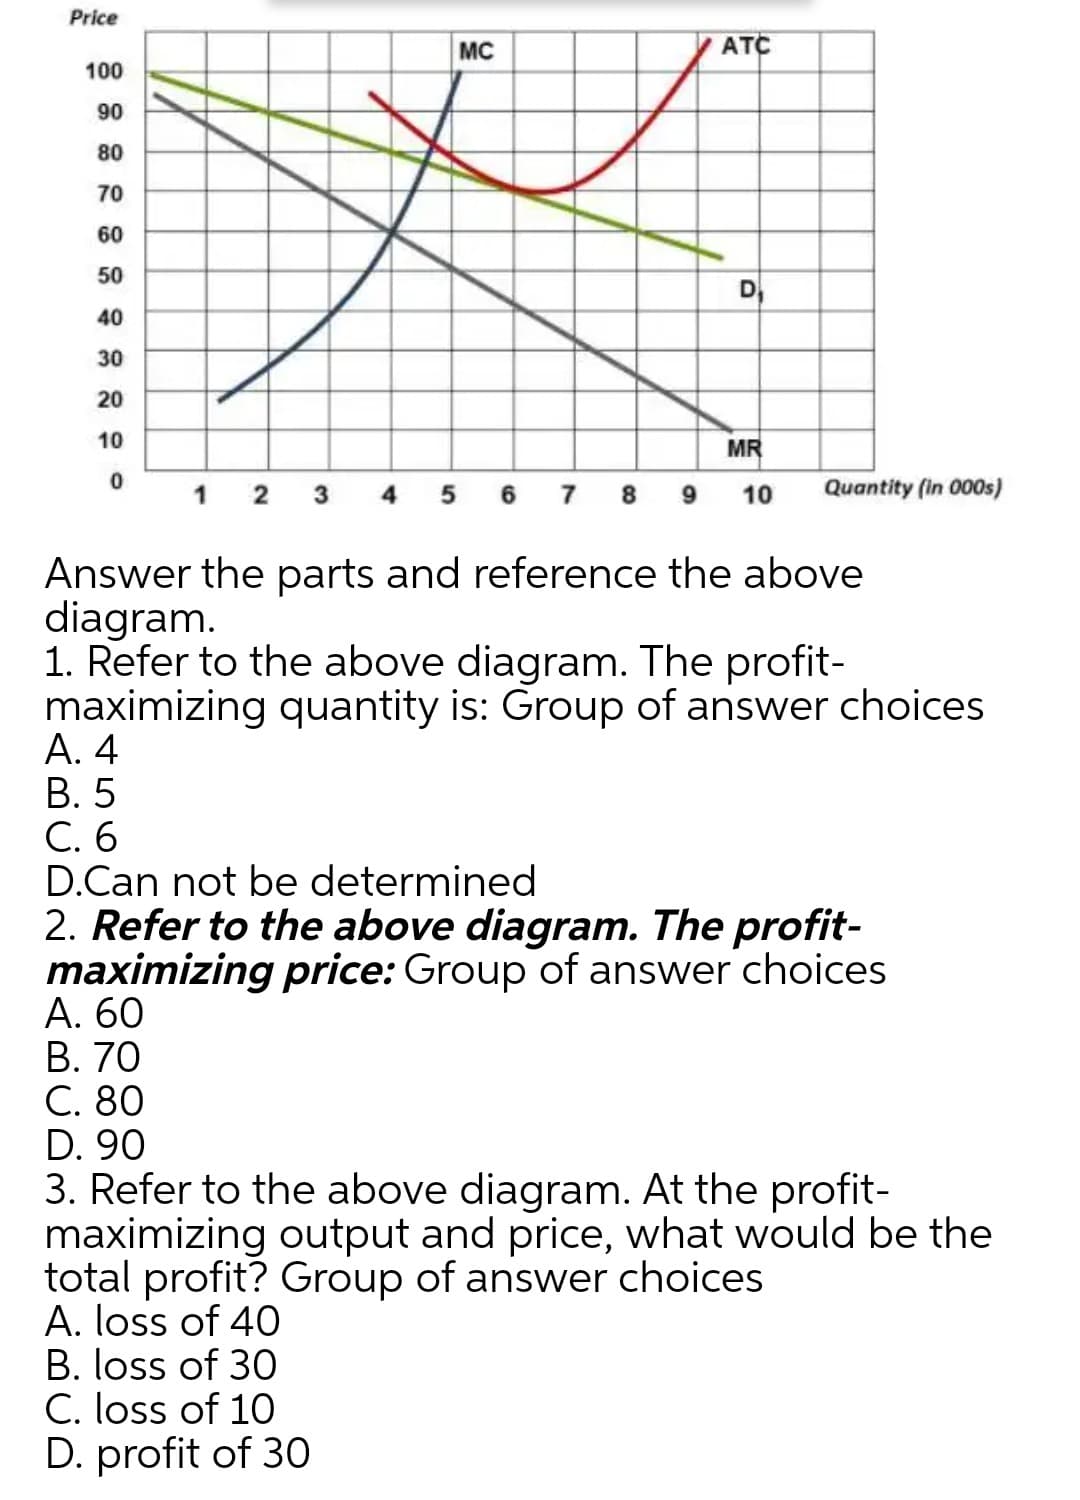 Price
MC
ATC
100
90
08
70
60
50
D
40
30
20
10
MR
5 6 7 8 9
Quantity (in 000s)
1
3
10
Answer the parts and reference the above
diagram.
1. Refer to the above diagram. The profit-
maximizing quantity is: Group of answer choices
А. 4
В. 5
С. 6
D.Can not be determined
2. Refer to the above diagram. The profit-
maximizing price: Group of answer choices
А. 60
В. 70
C. 80
D. 90
3. Refer to the above diagram. At the profit-
maximizing output and price, what would be the
total profit? Group of answer choices
A. loss of 40
B. loss of 30
C. loss of 10
D. profit of 30
